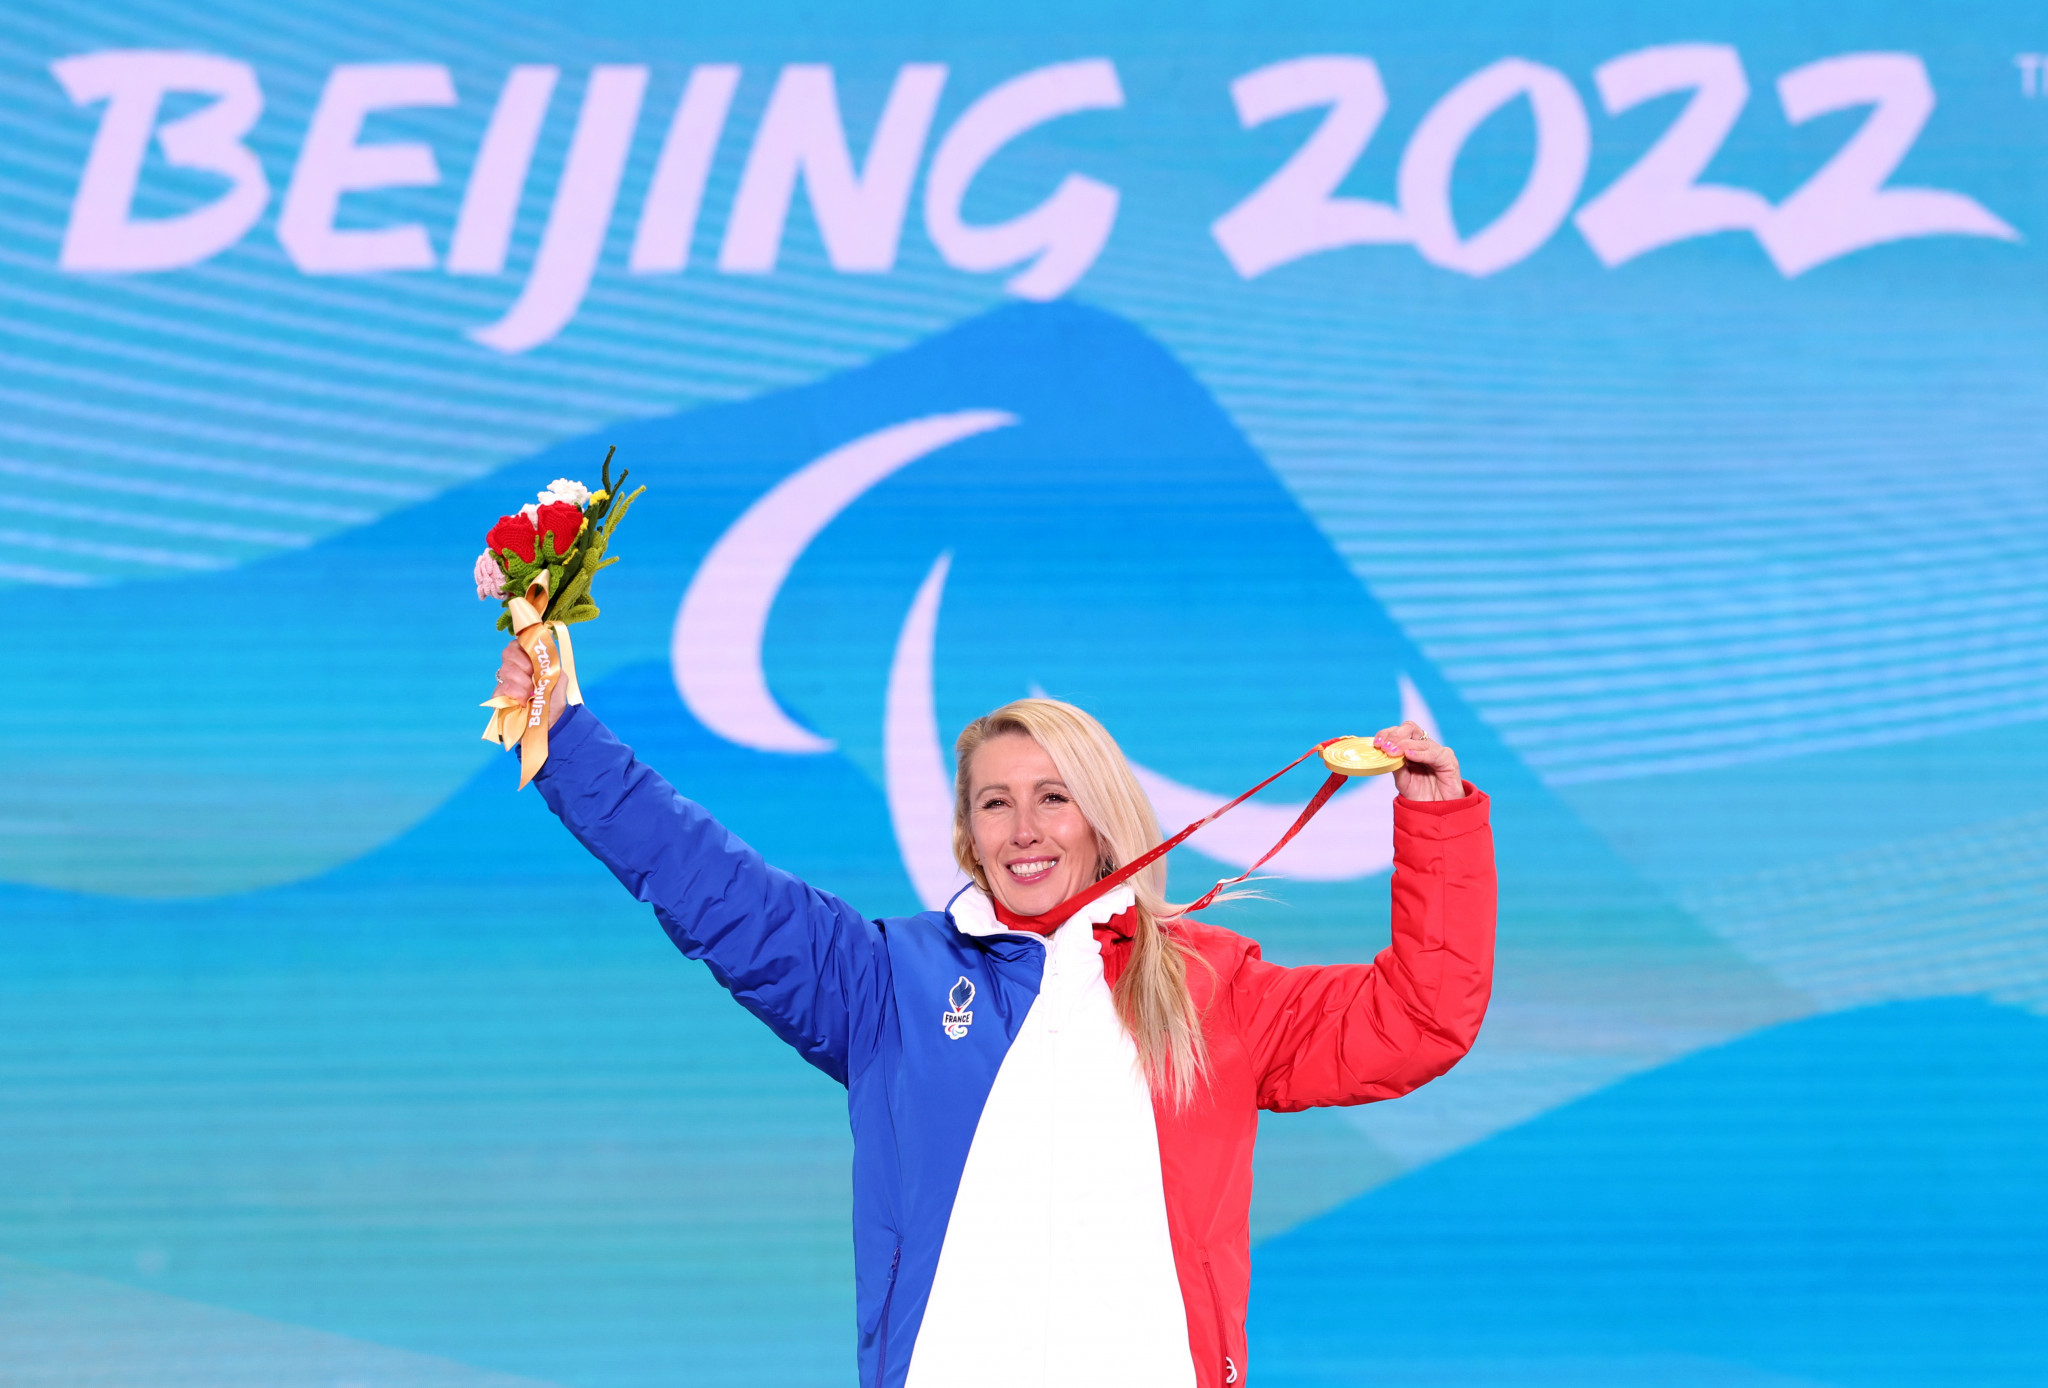 The IPC has ended its efforts to have Cécile Hernandez's Beijing 2022 gold medal take away ©Getty Images